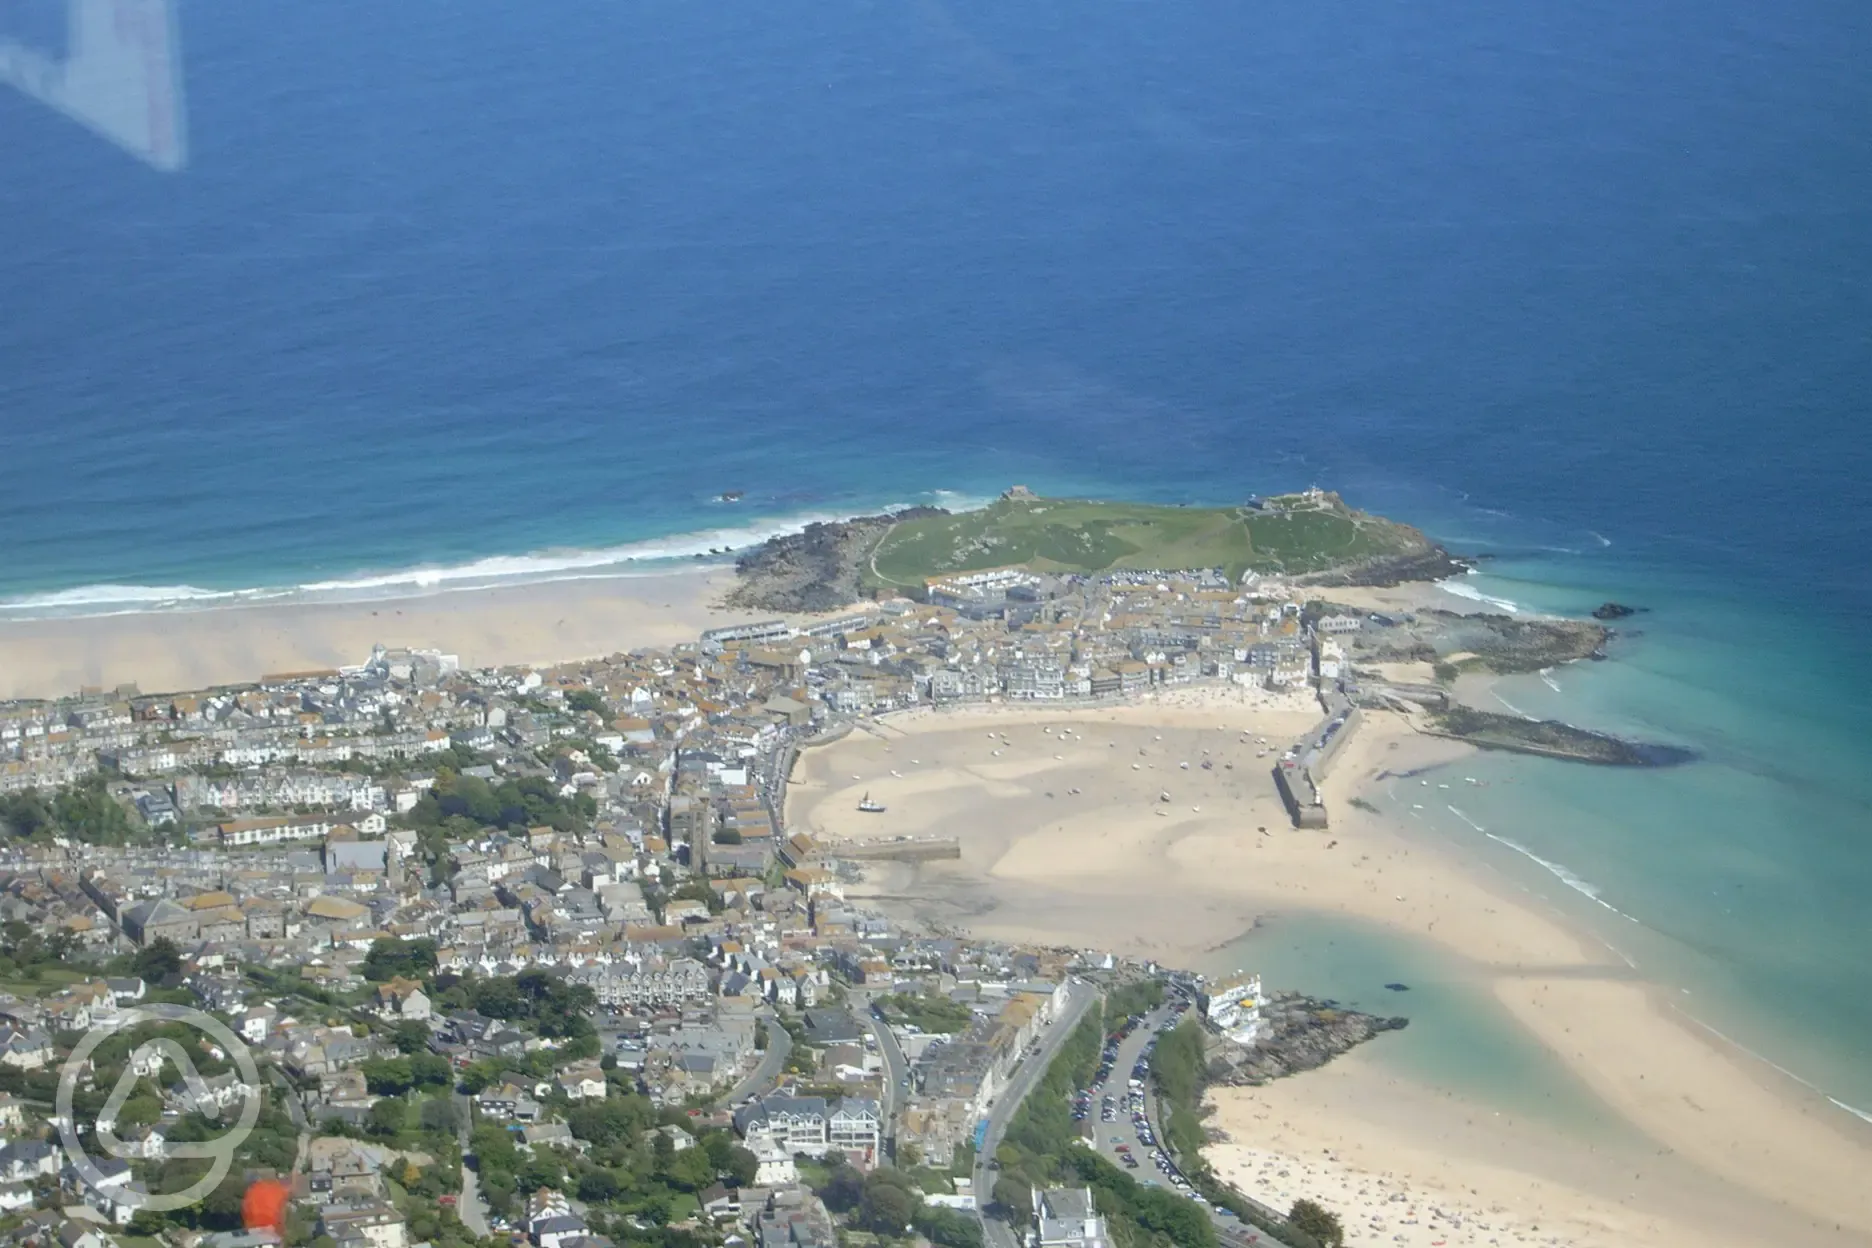 Nearby St Ives